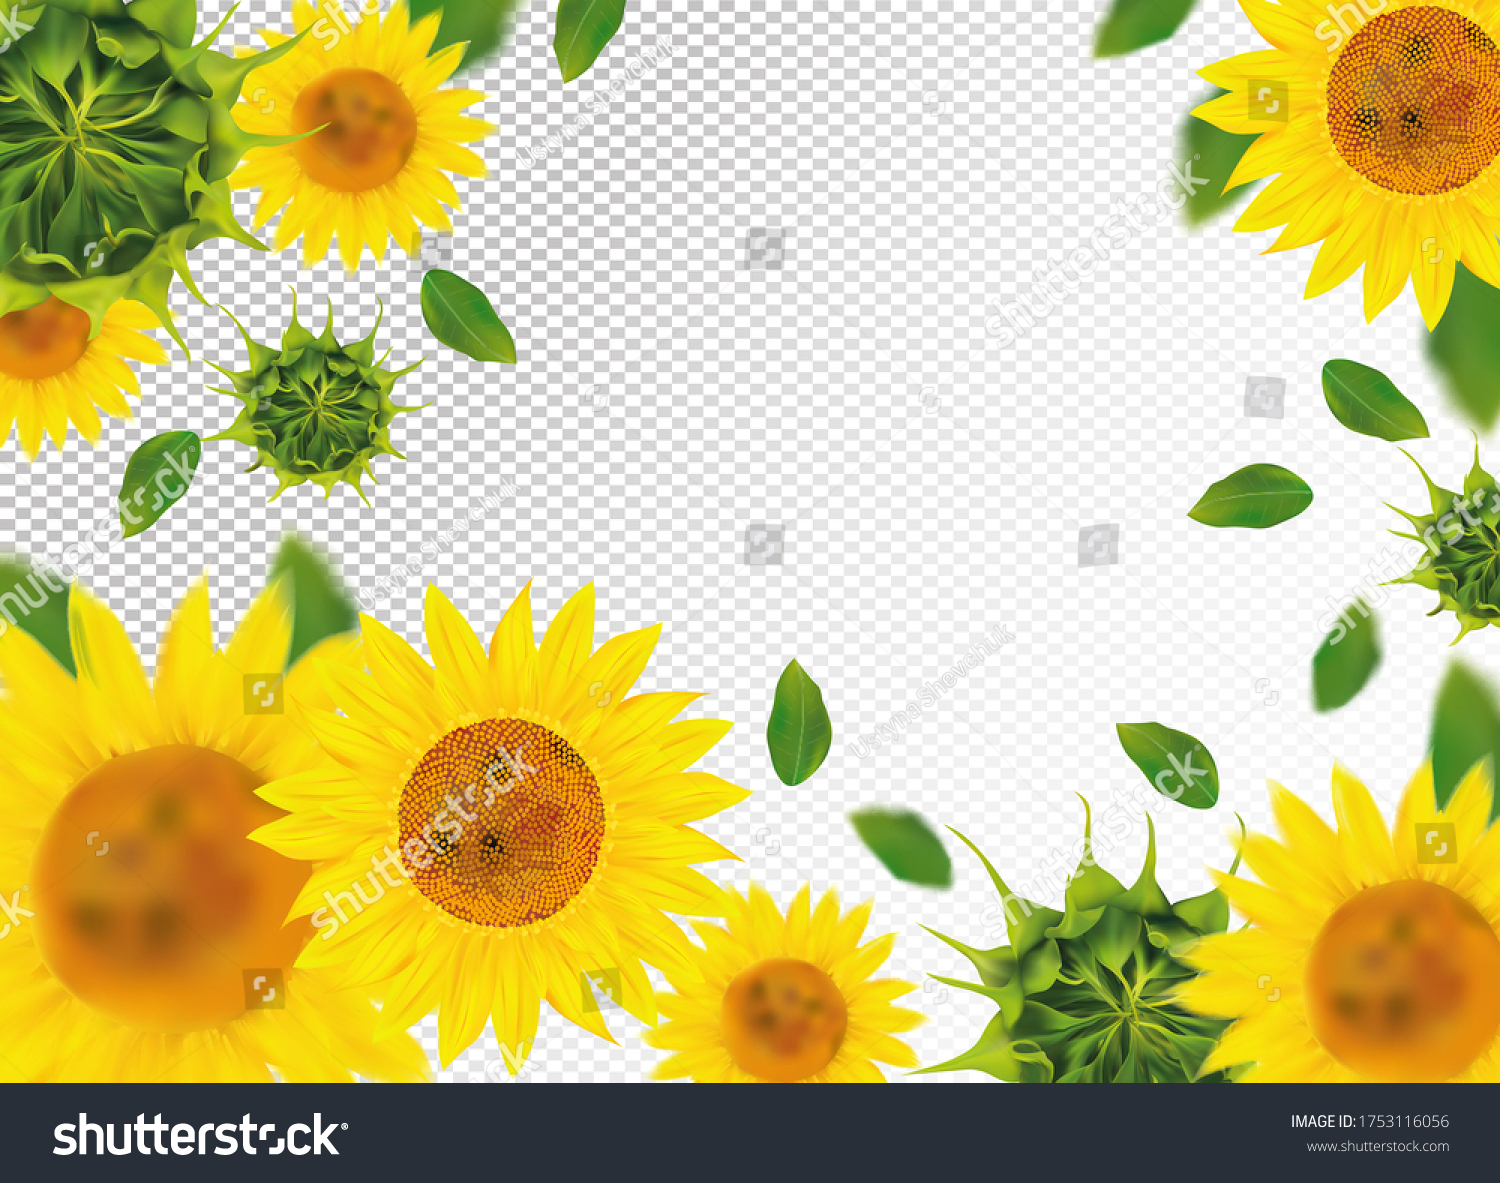 SVG of 3D realistic sunflower with green leaf. Yellow sunflower in motion. Beautiful sunflower background. Falling sunflower. Vector illustration svg